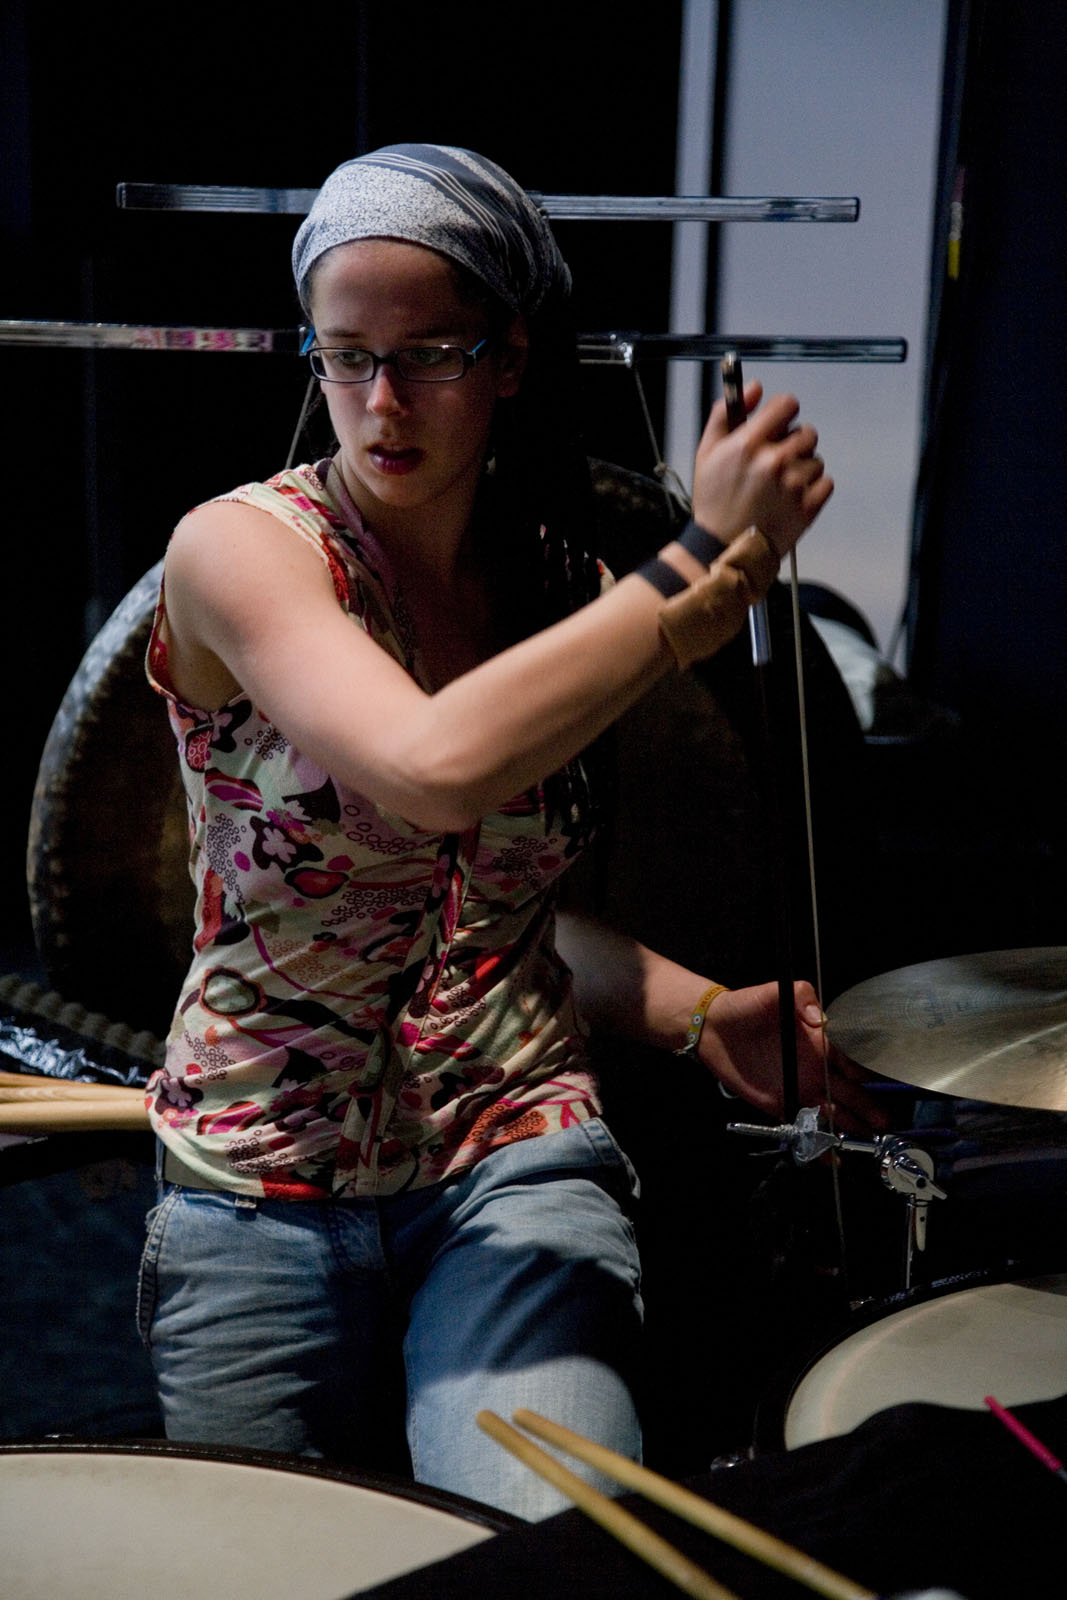 Claudia Hansen playing timpani in a percussion setup during the opera Medea directed by Lotte de Beer